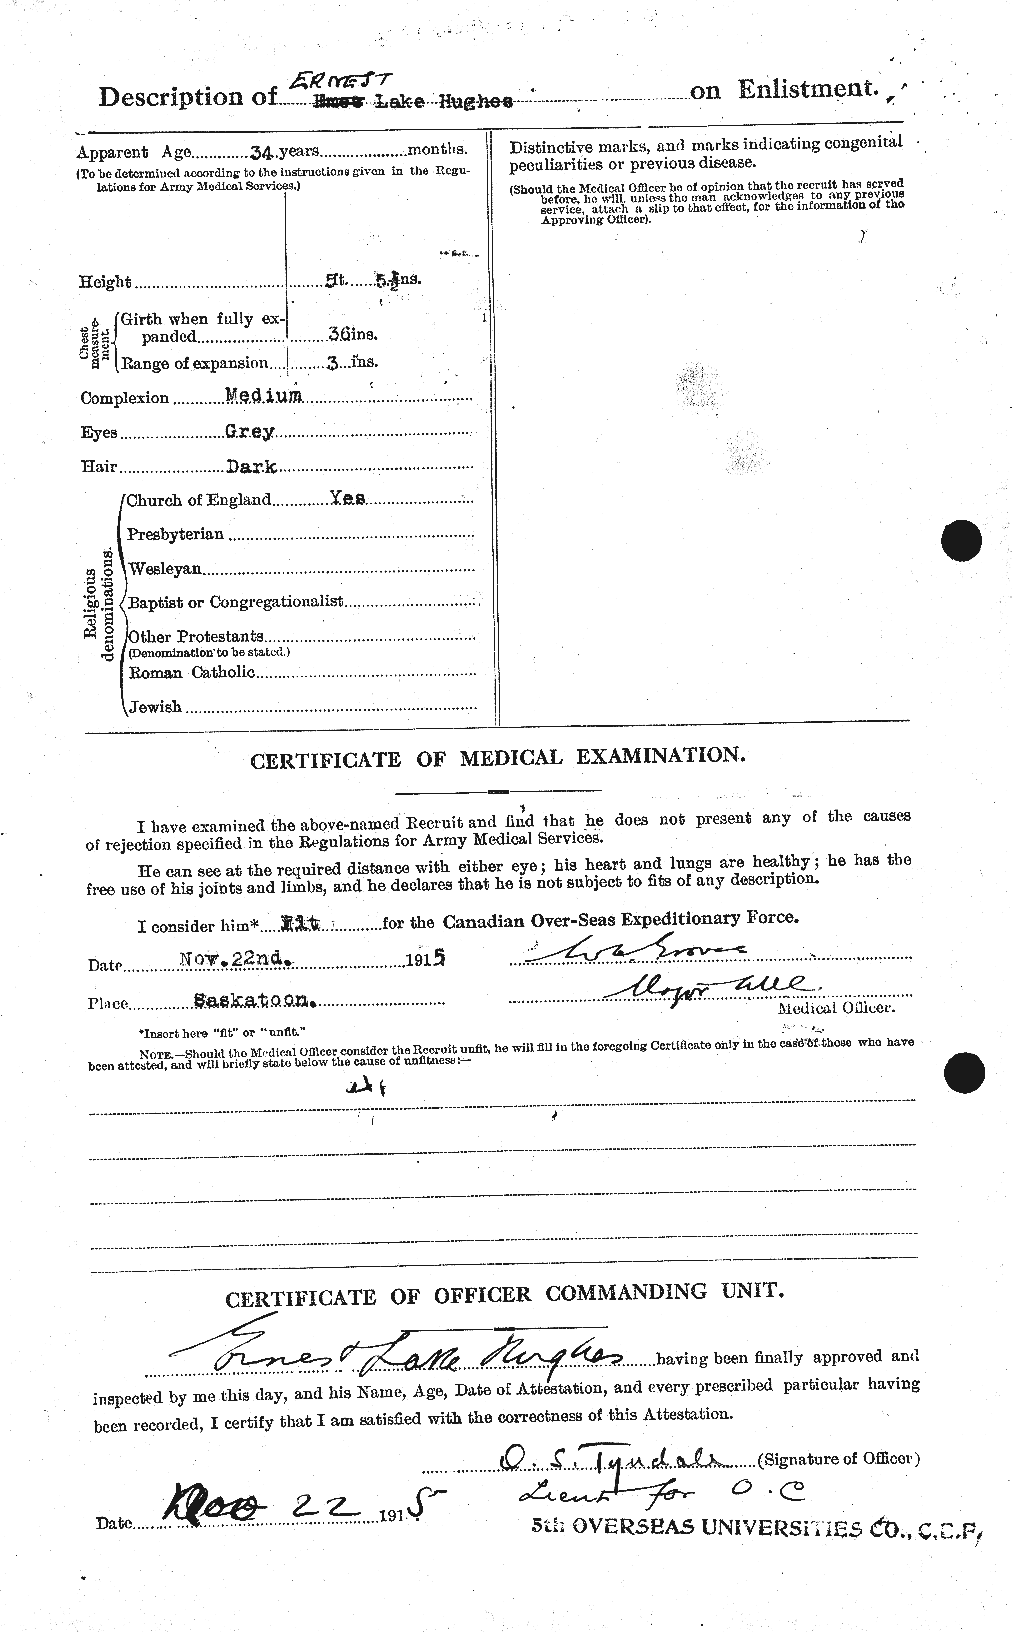 Personnel Records of the First World War - CEF 402716b